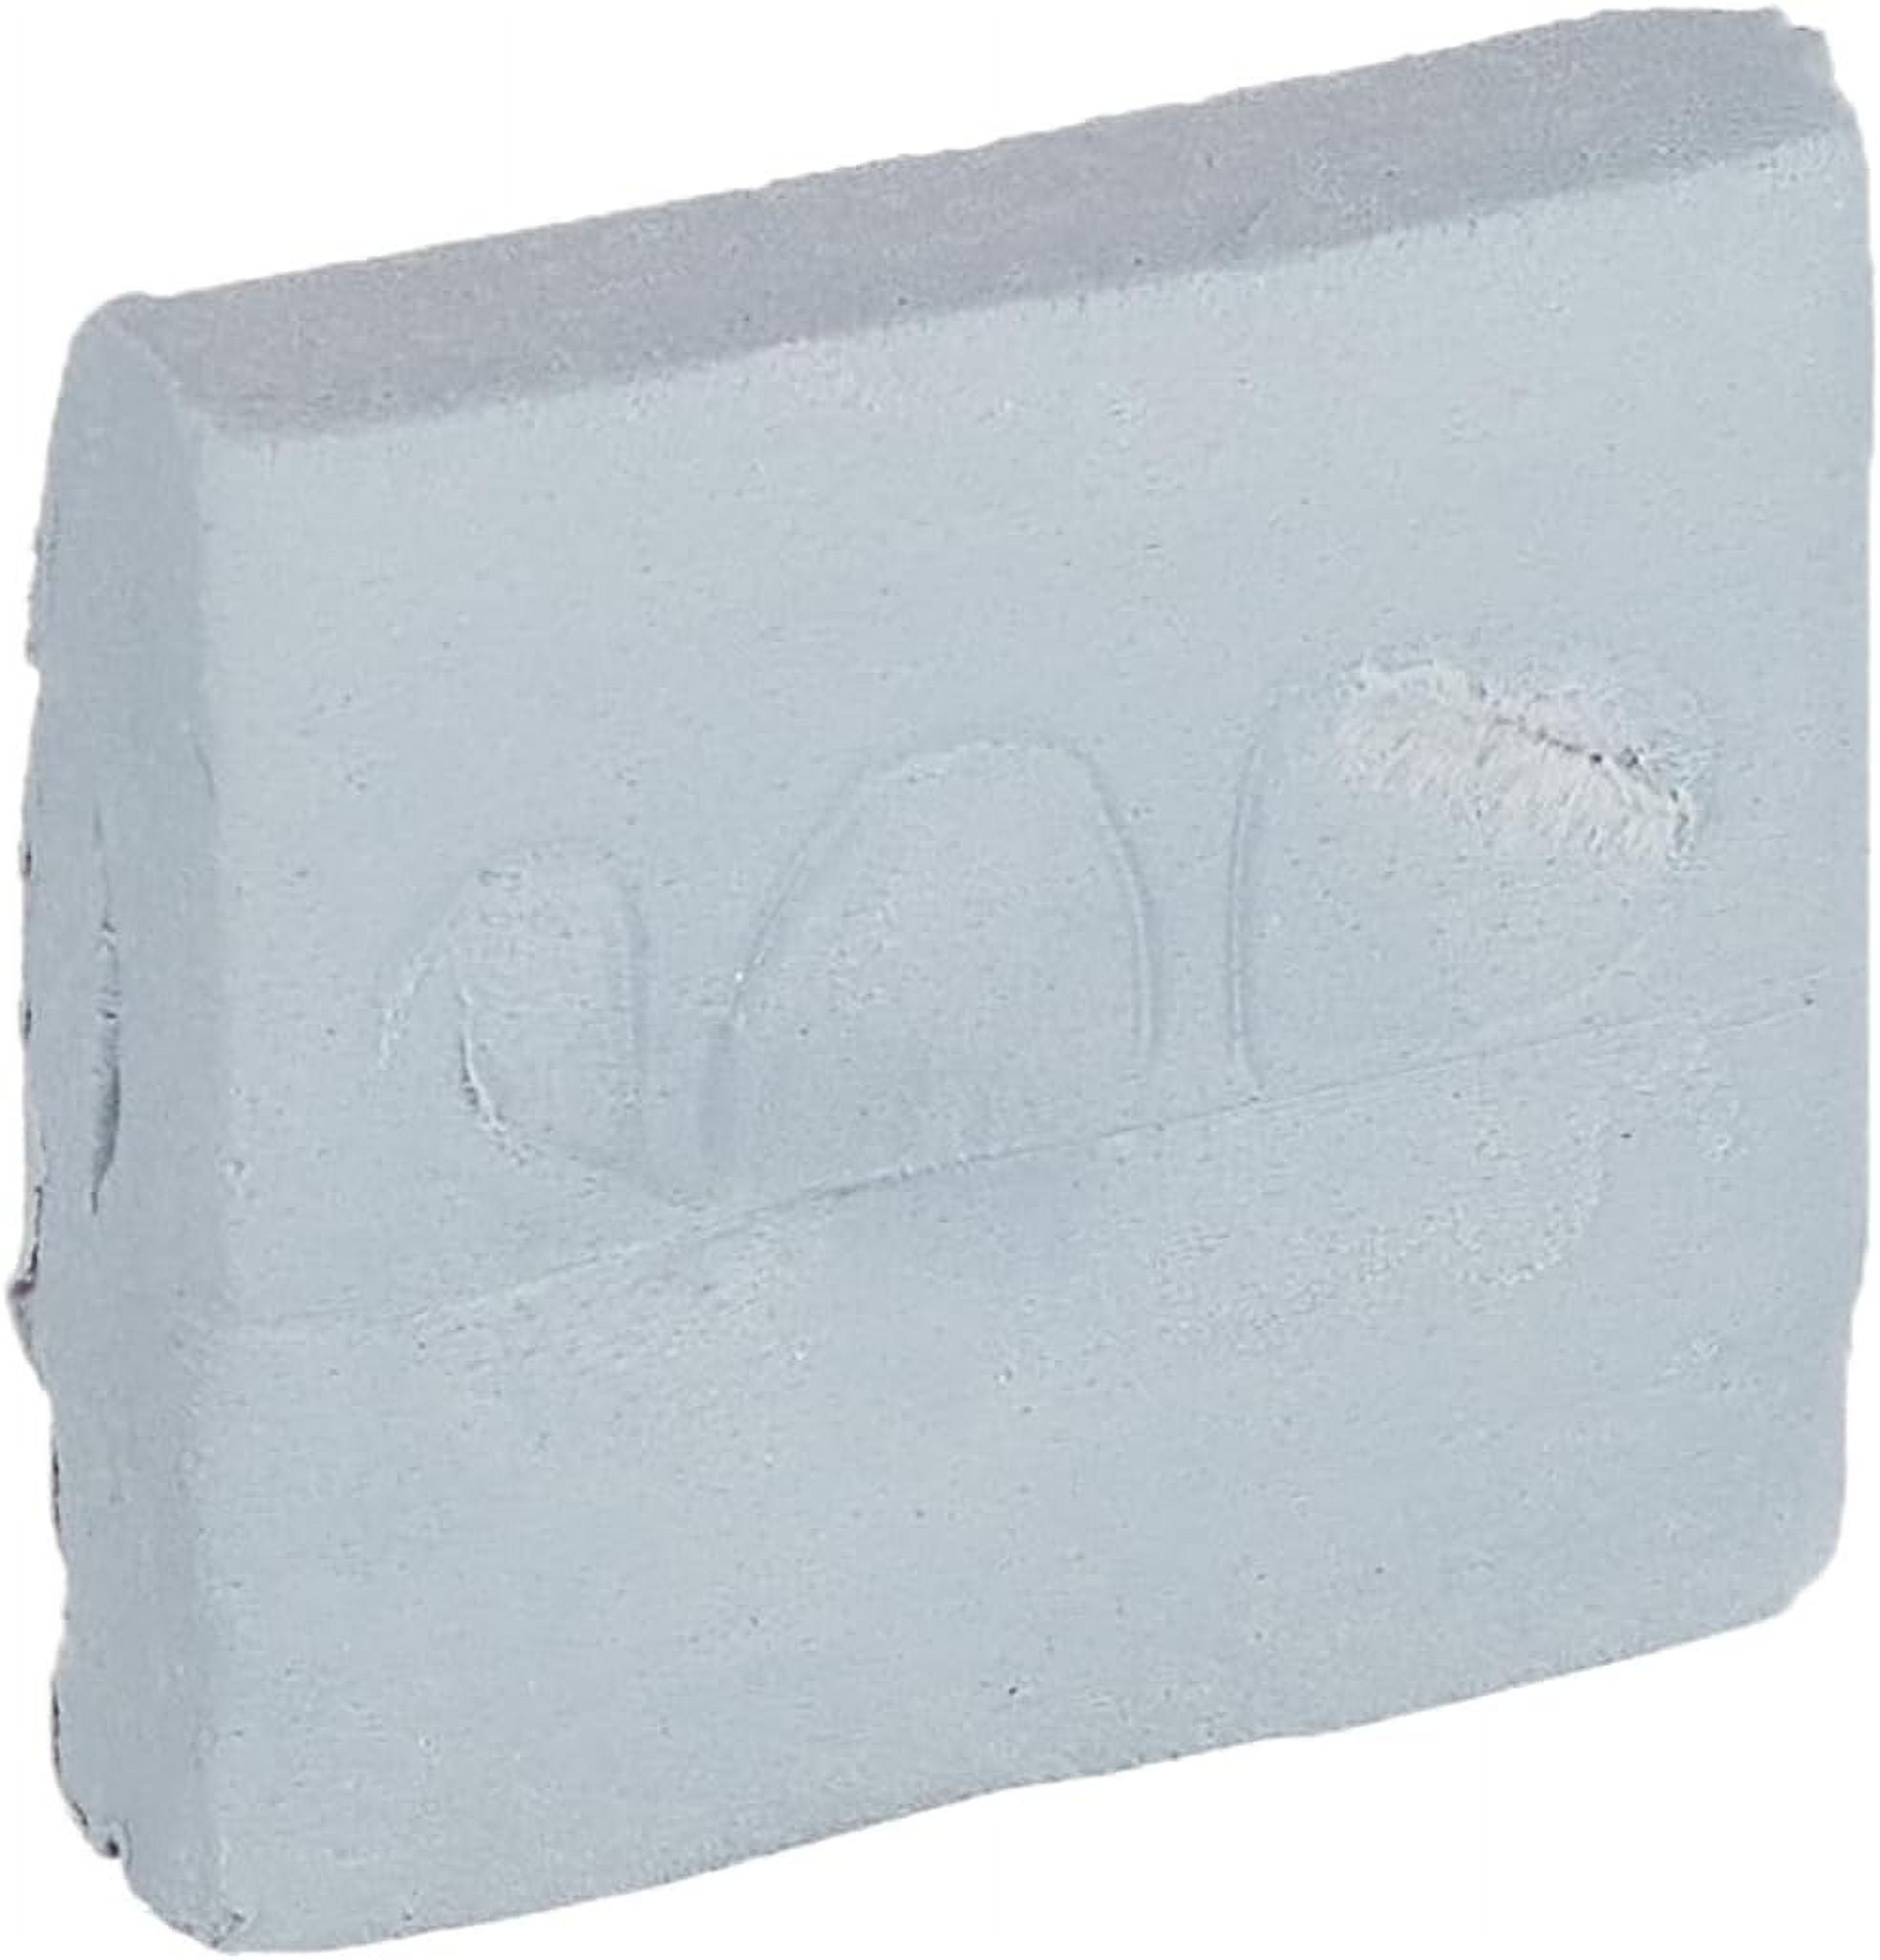 Faber Castell Kneadable Eraser, Set of 2, Grey, Carded